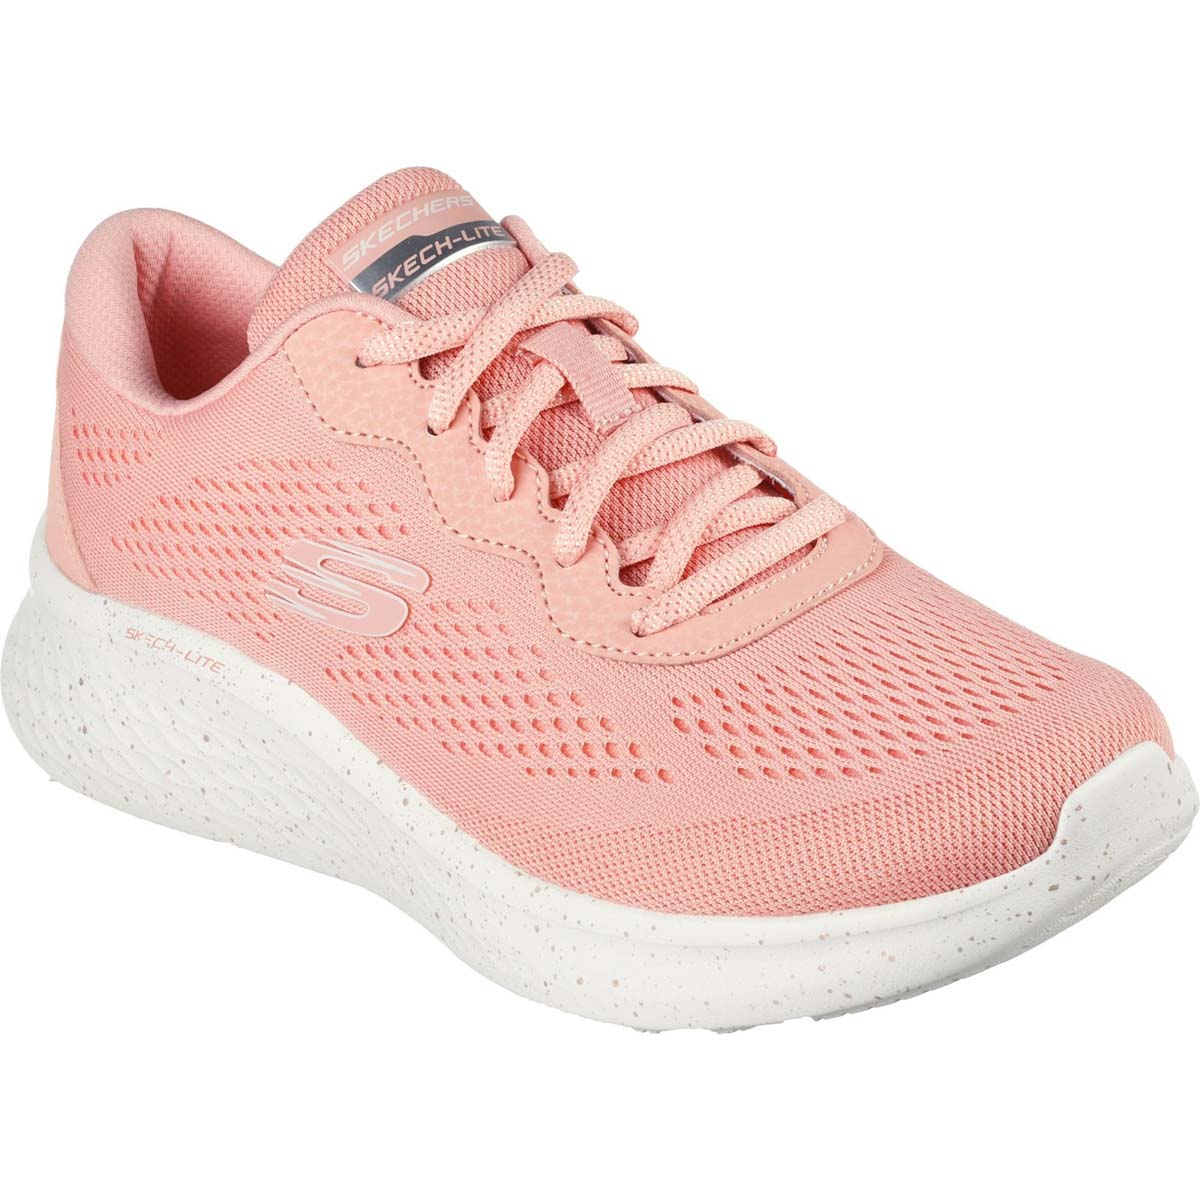 Skechers Skech-lite Pro ROS ROSE Womens trainers in a Plain Textile in Size 4